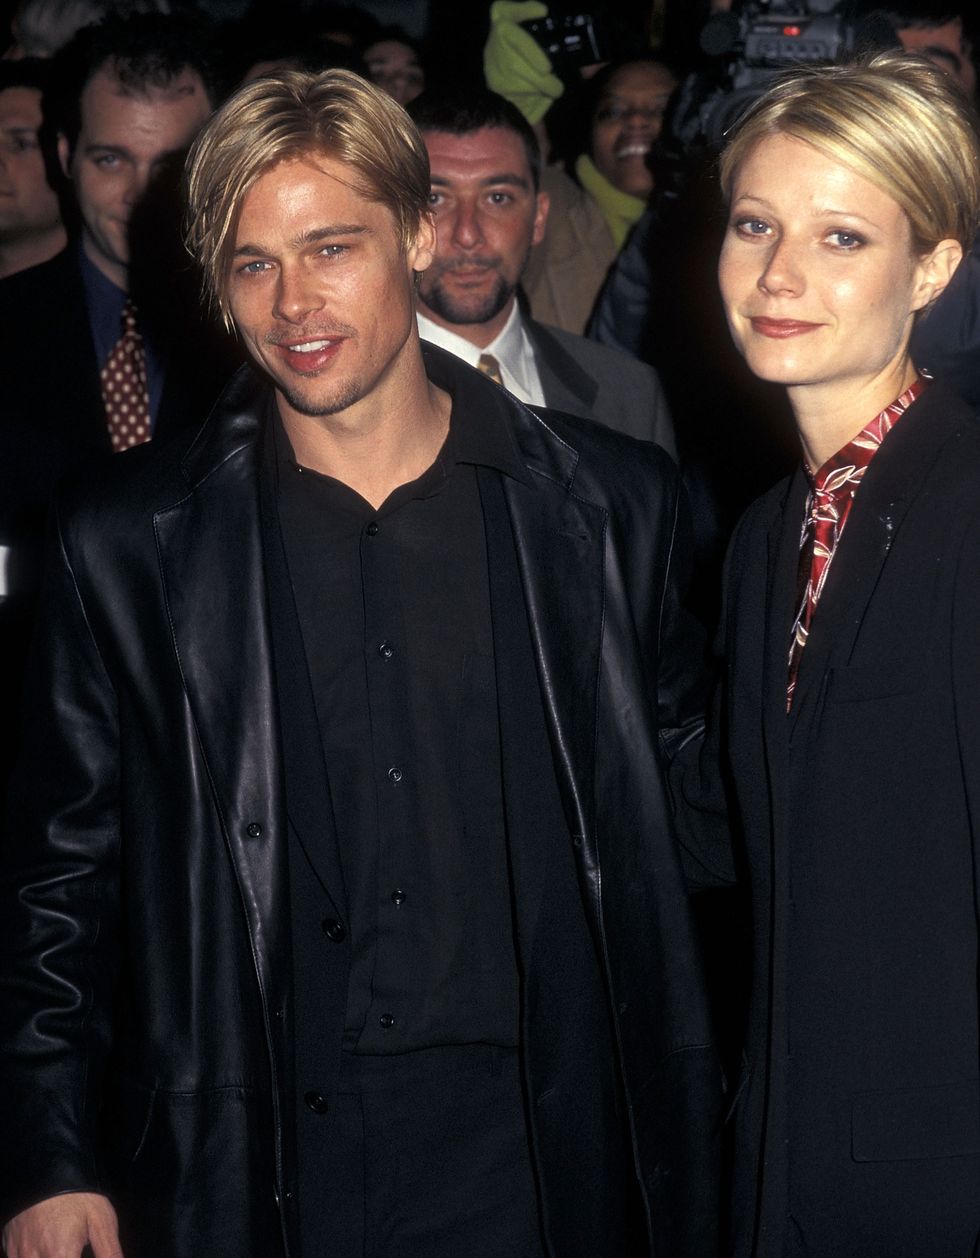 actor brad pitt and actress gwyneth paltrow attend the devils own new york city premiere on march 13, 1997 at city cinemas cinema 1 in new york city photo by ron galellaron galella collection via getty images